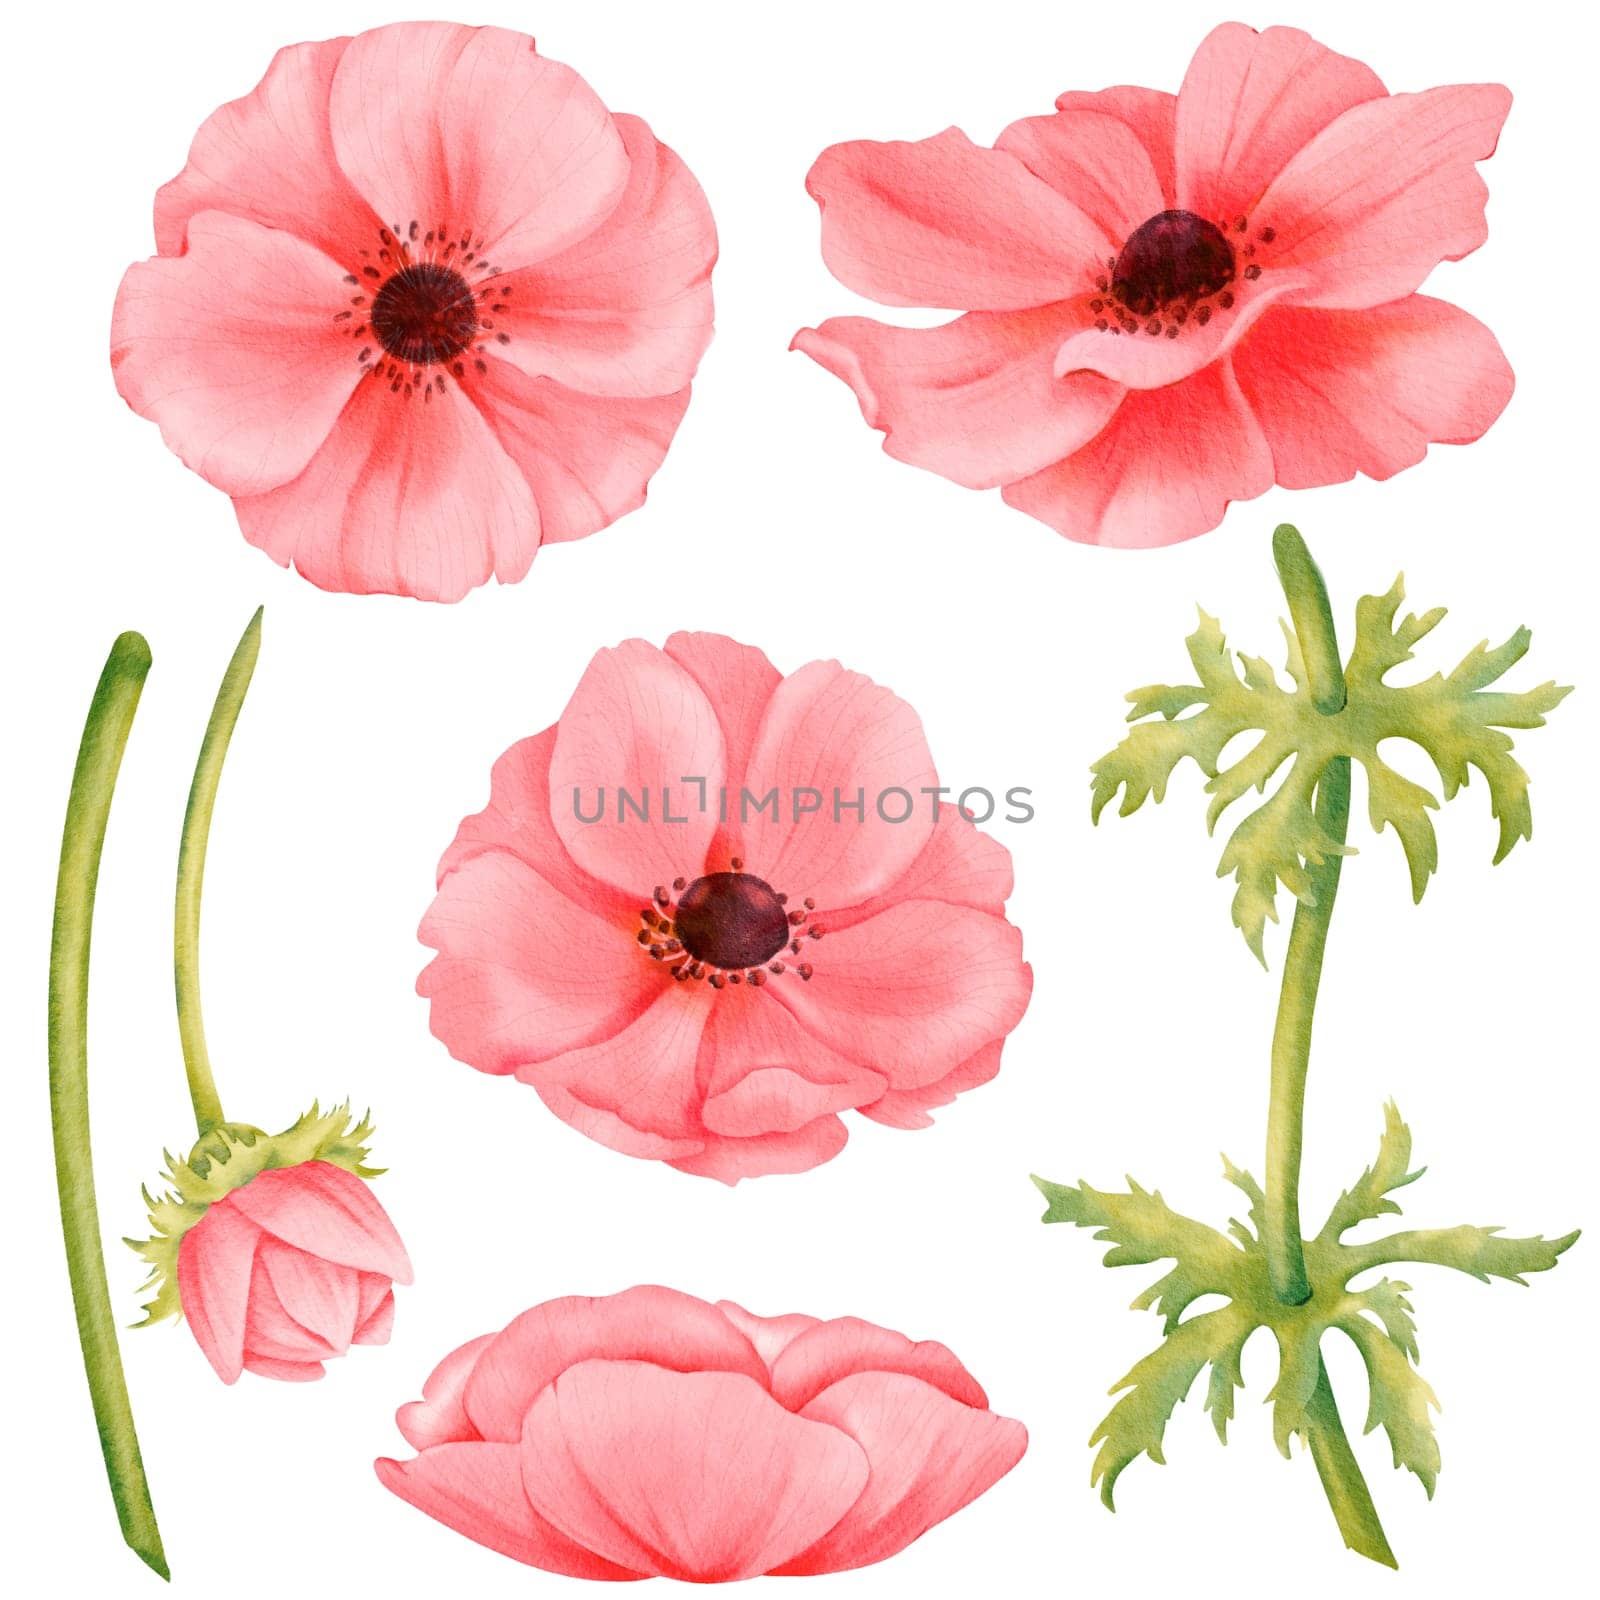 Watercolor flower assortment. Pink anemone construction kit. blossoms, bud, stems, and foliage. for greeting card designs, web layouts, printed materials, wallpapers, gift wrapping and accessories.